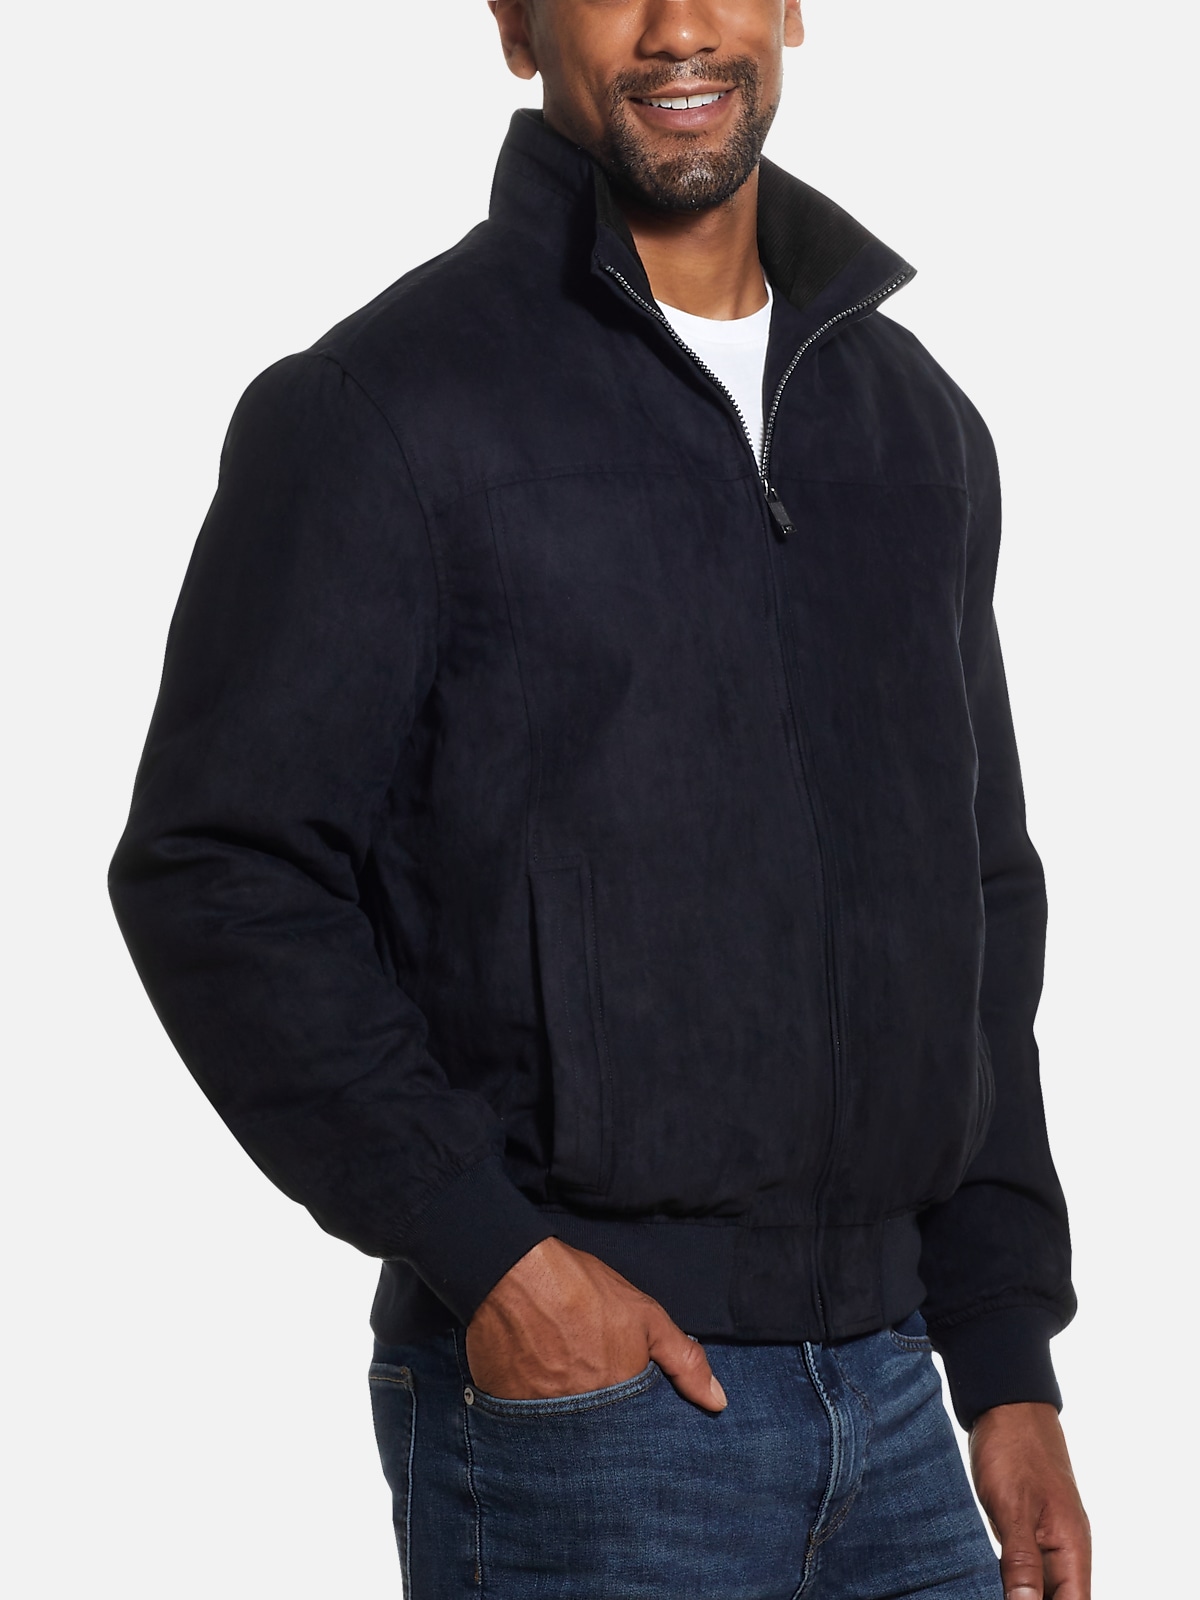 Weatherproof Modern Fit Faux Suede Bomber Jacket | All Clearance $39.99 ...